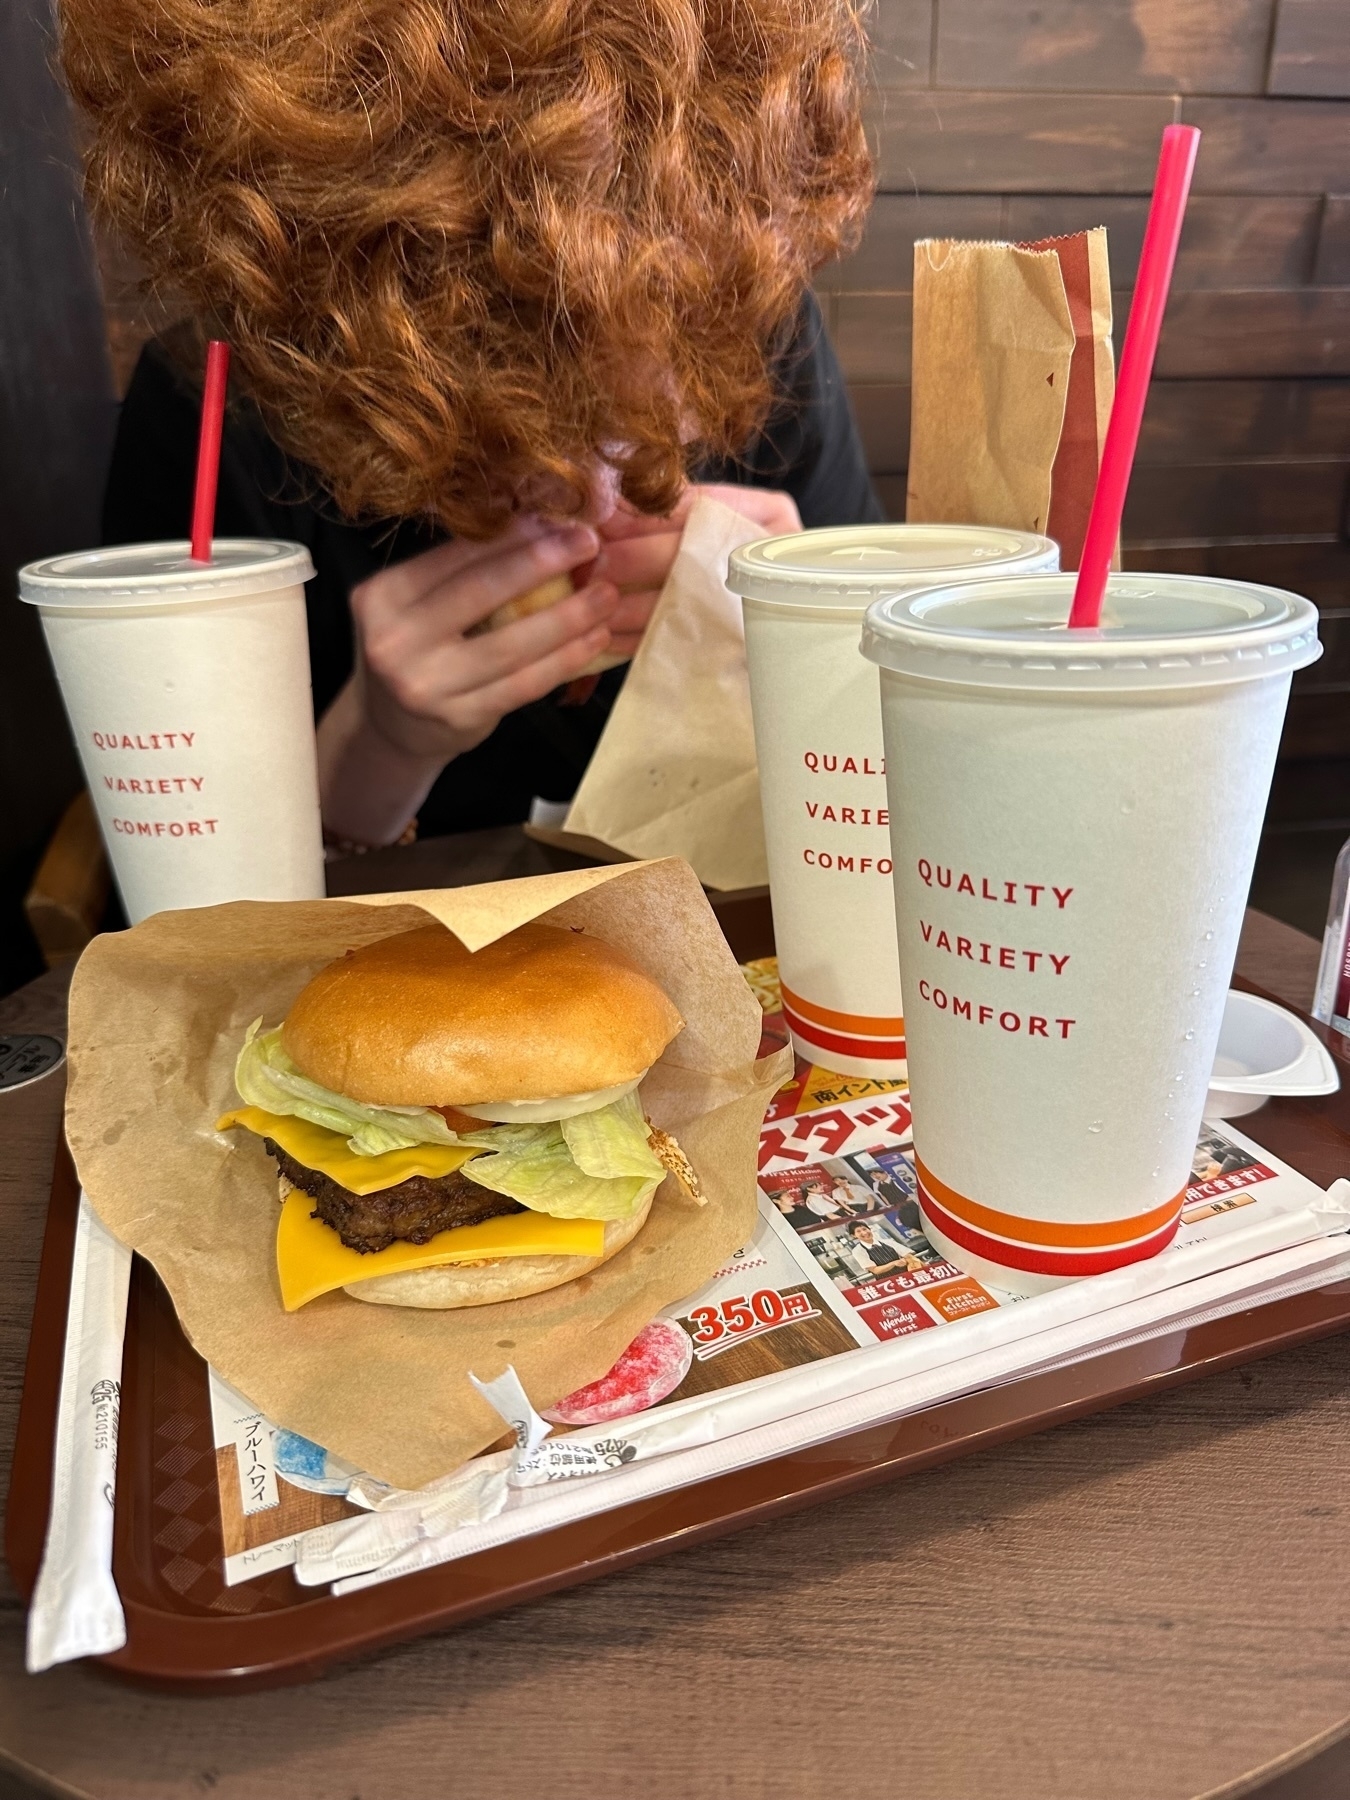 A person with curly red hair eating a sandwich, a cheeseburger with lettuce on a tray, two drinks with red straws, disposable cutlery, and fast food restaurant branding.